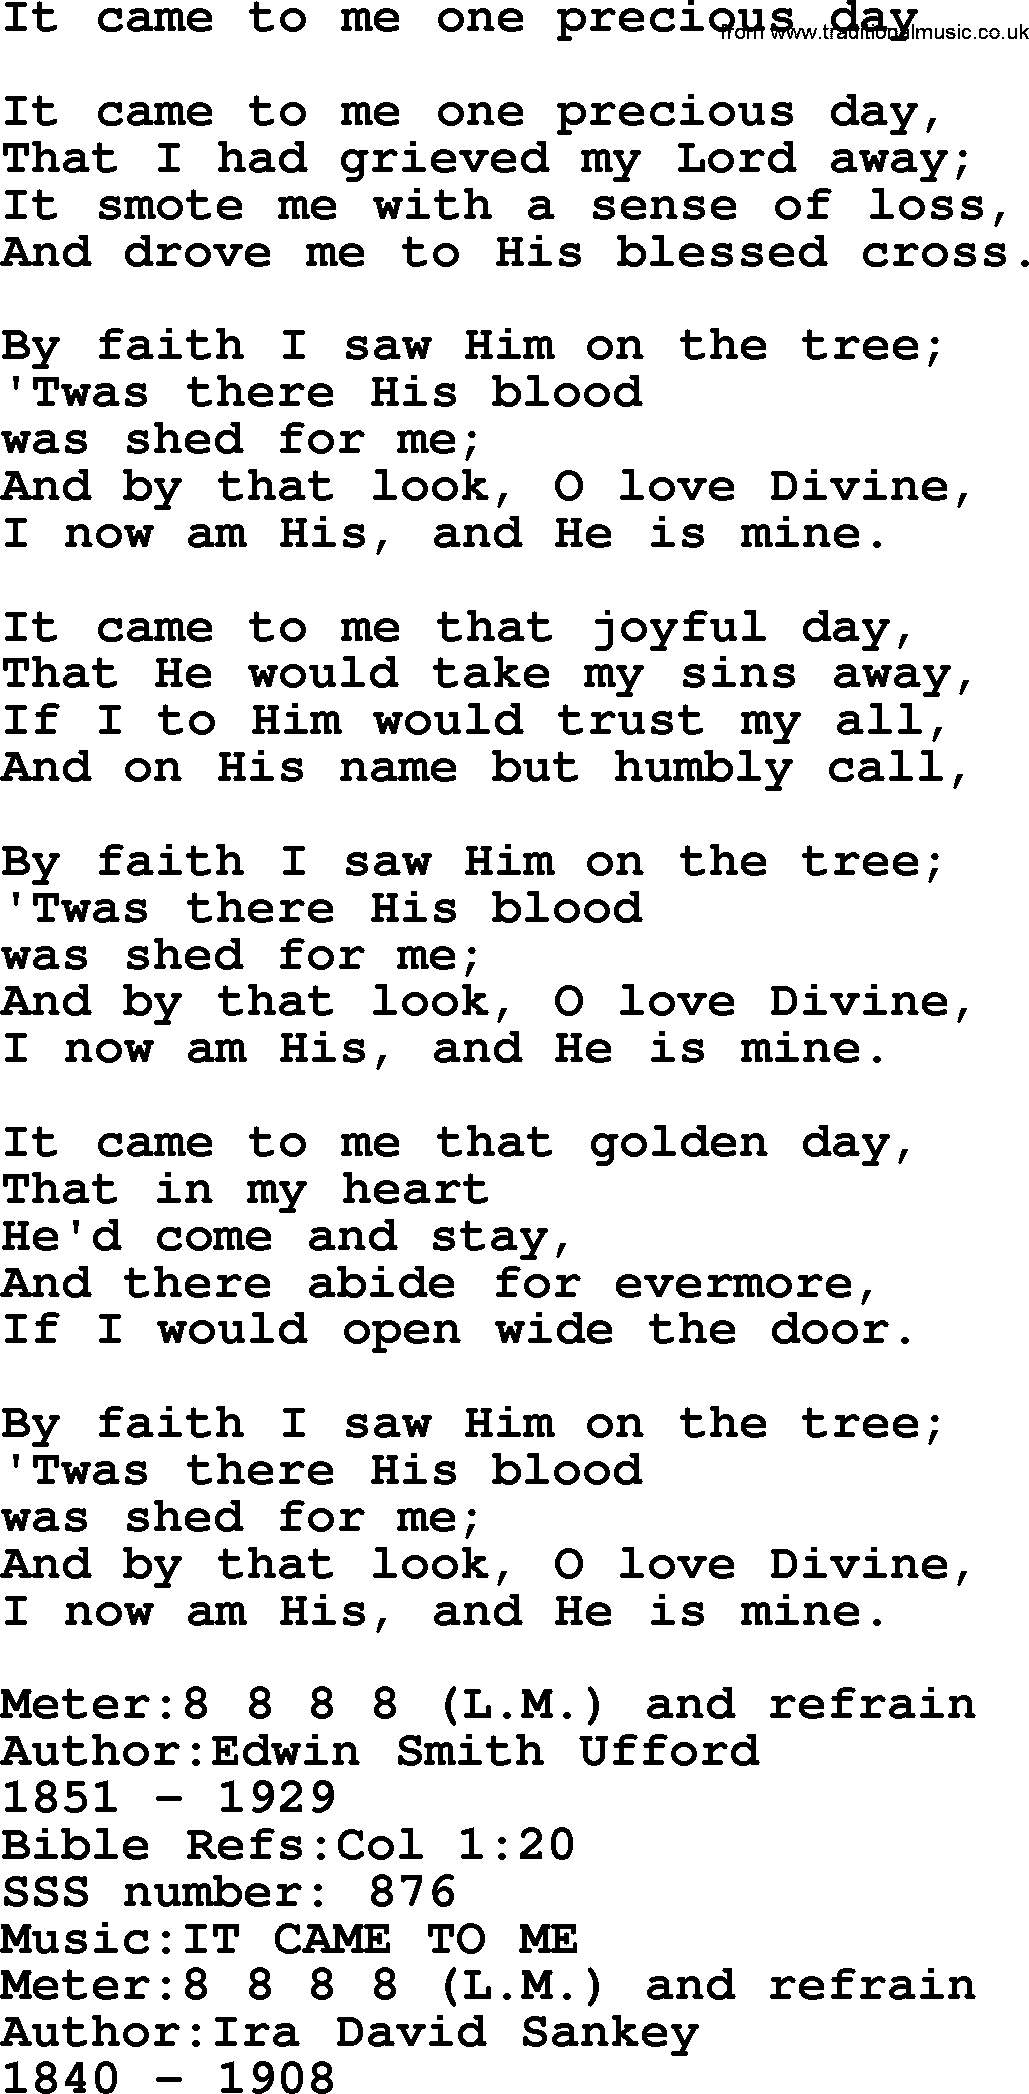 Sacred Songs and Solos complete, 1200 Hymns, title: It Came To Me One Precious Day, lyrics and PDF